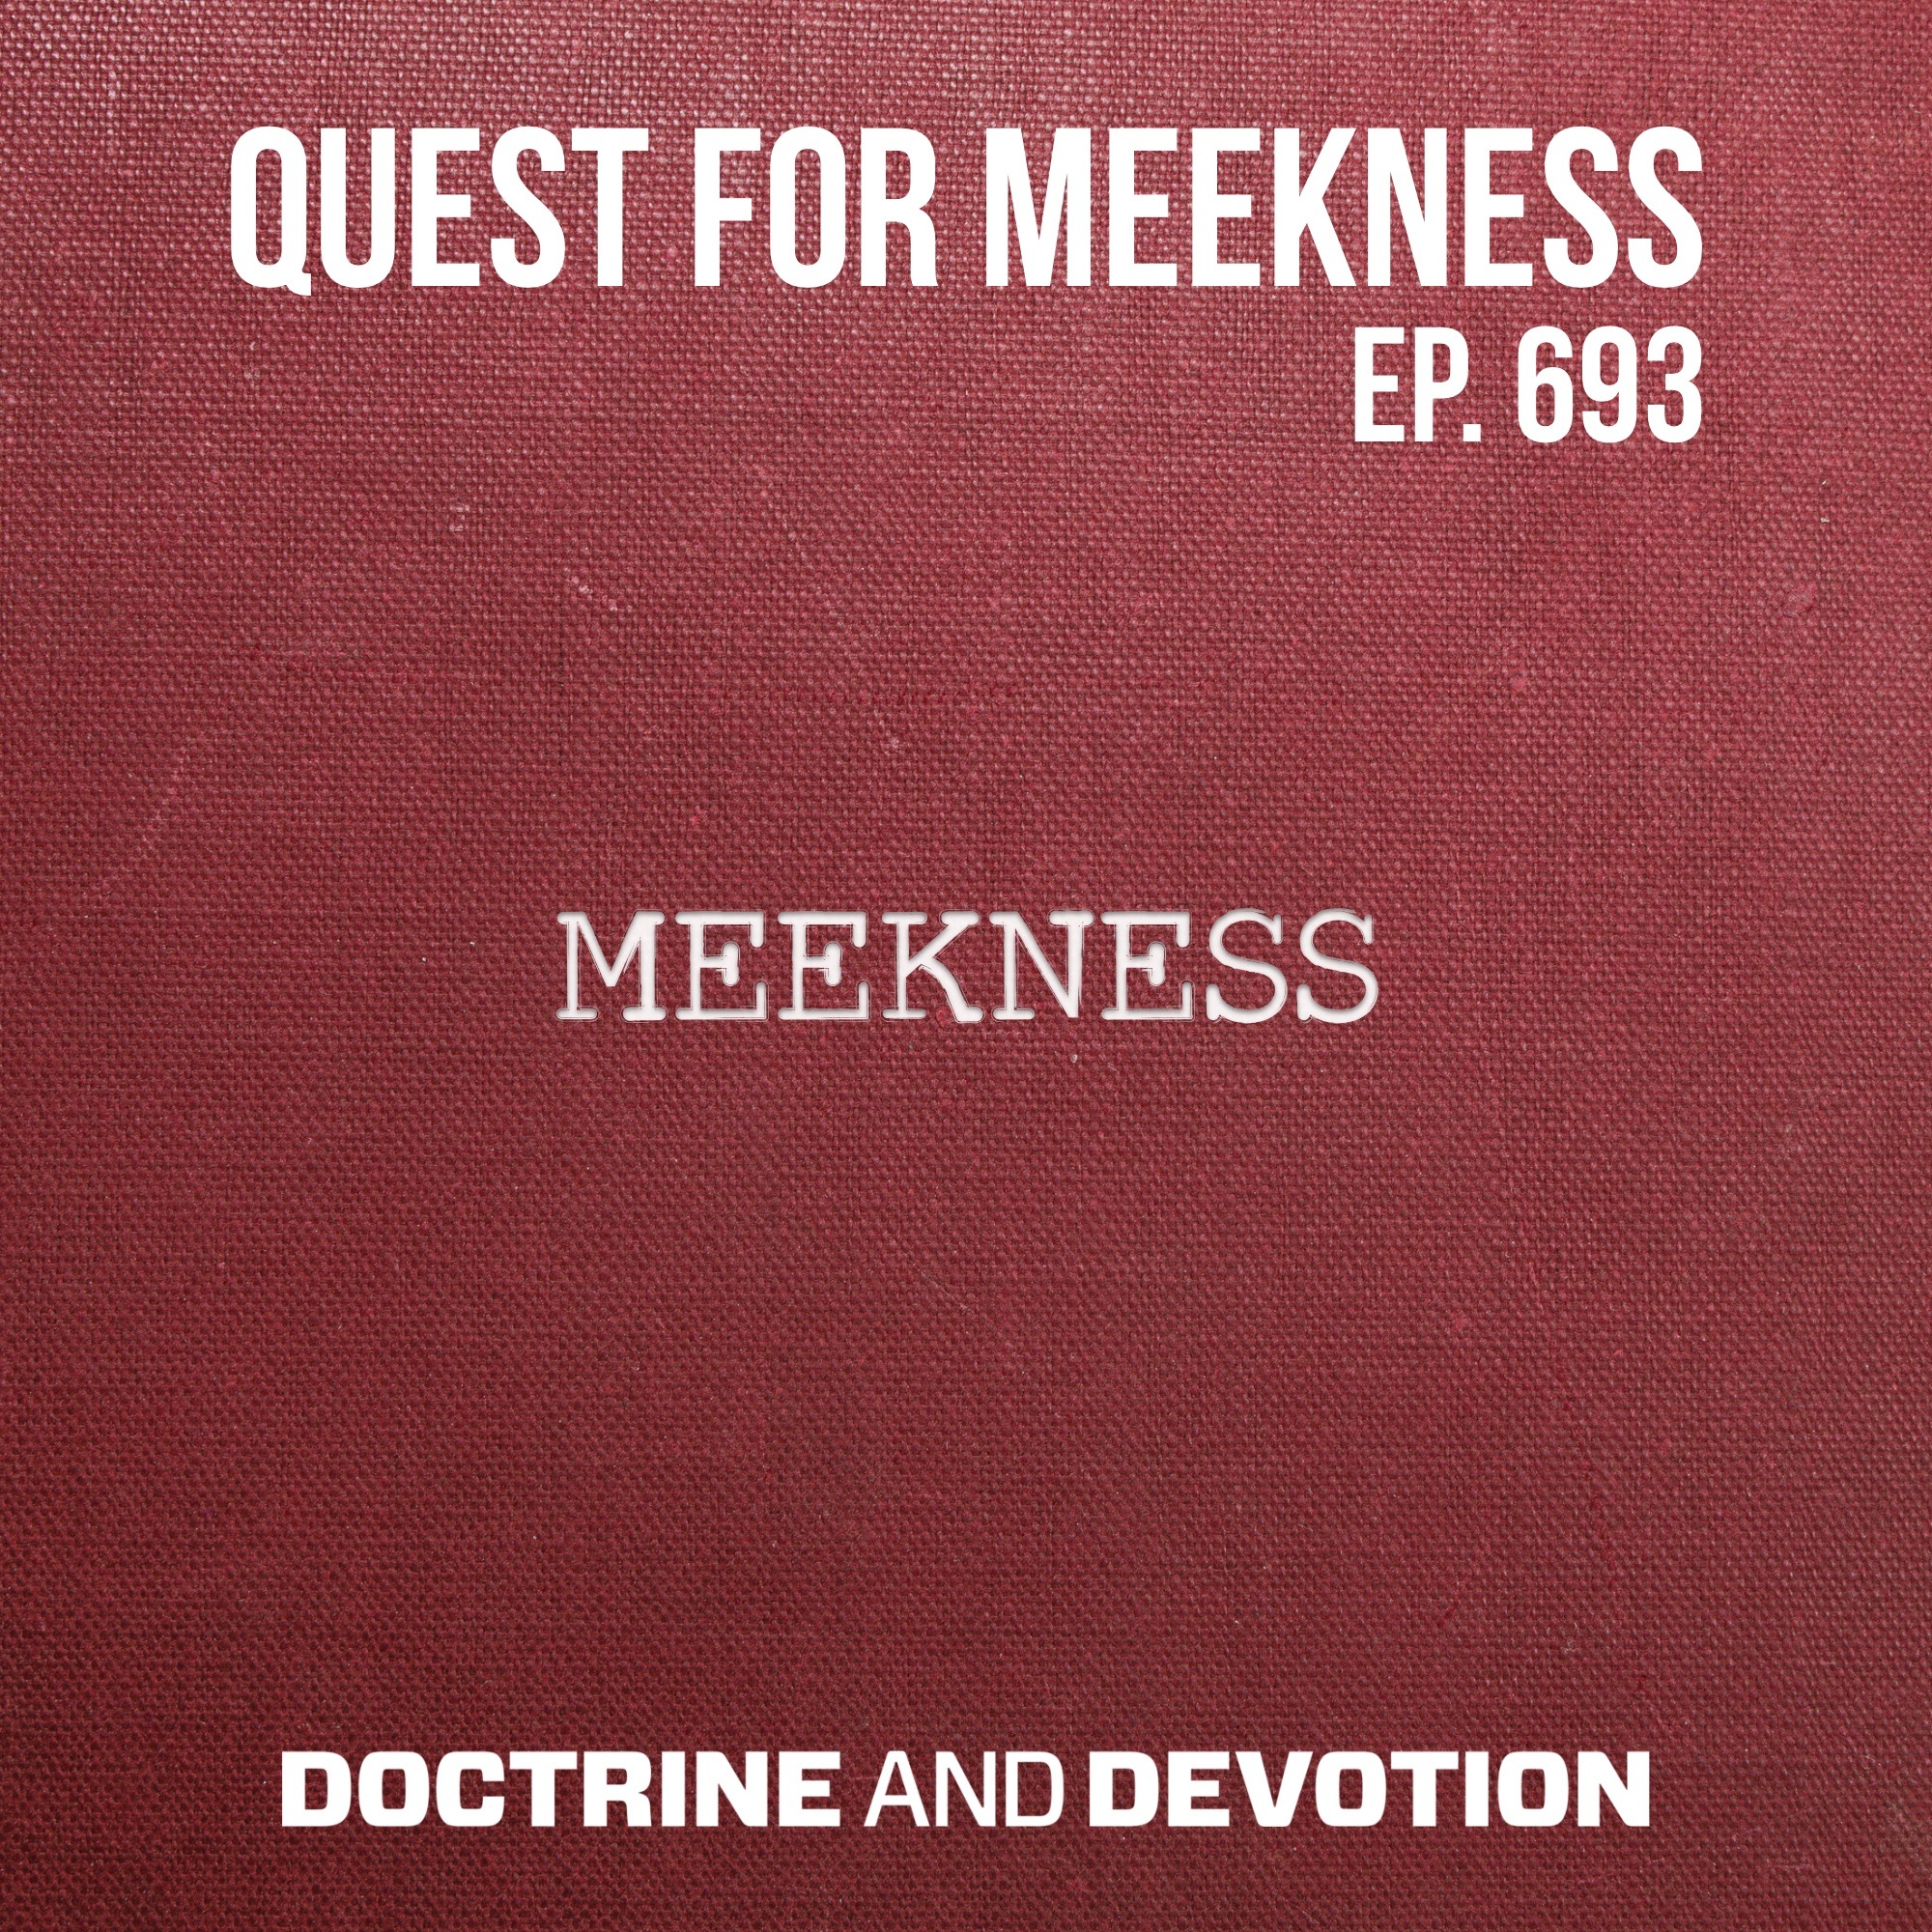 Quest for Meekness